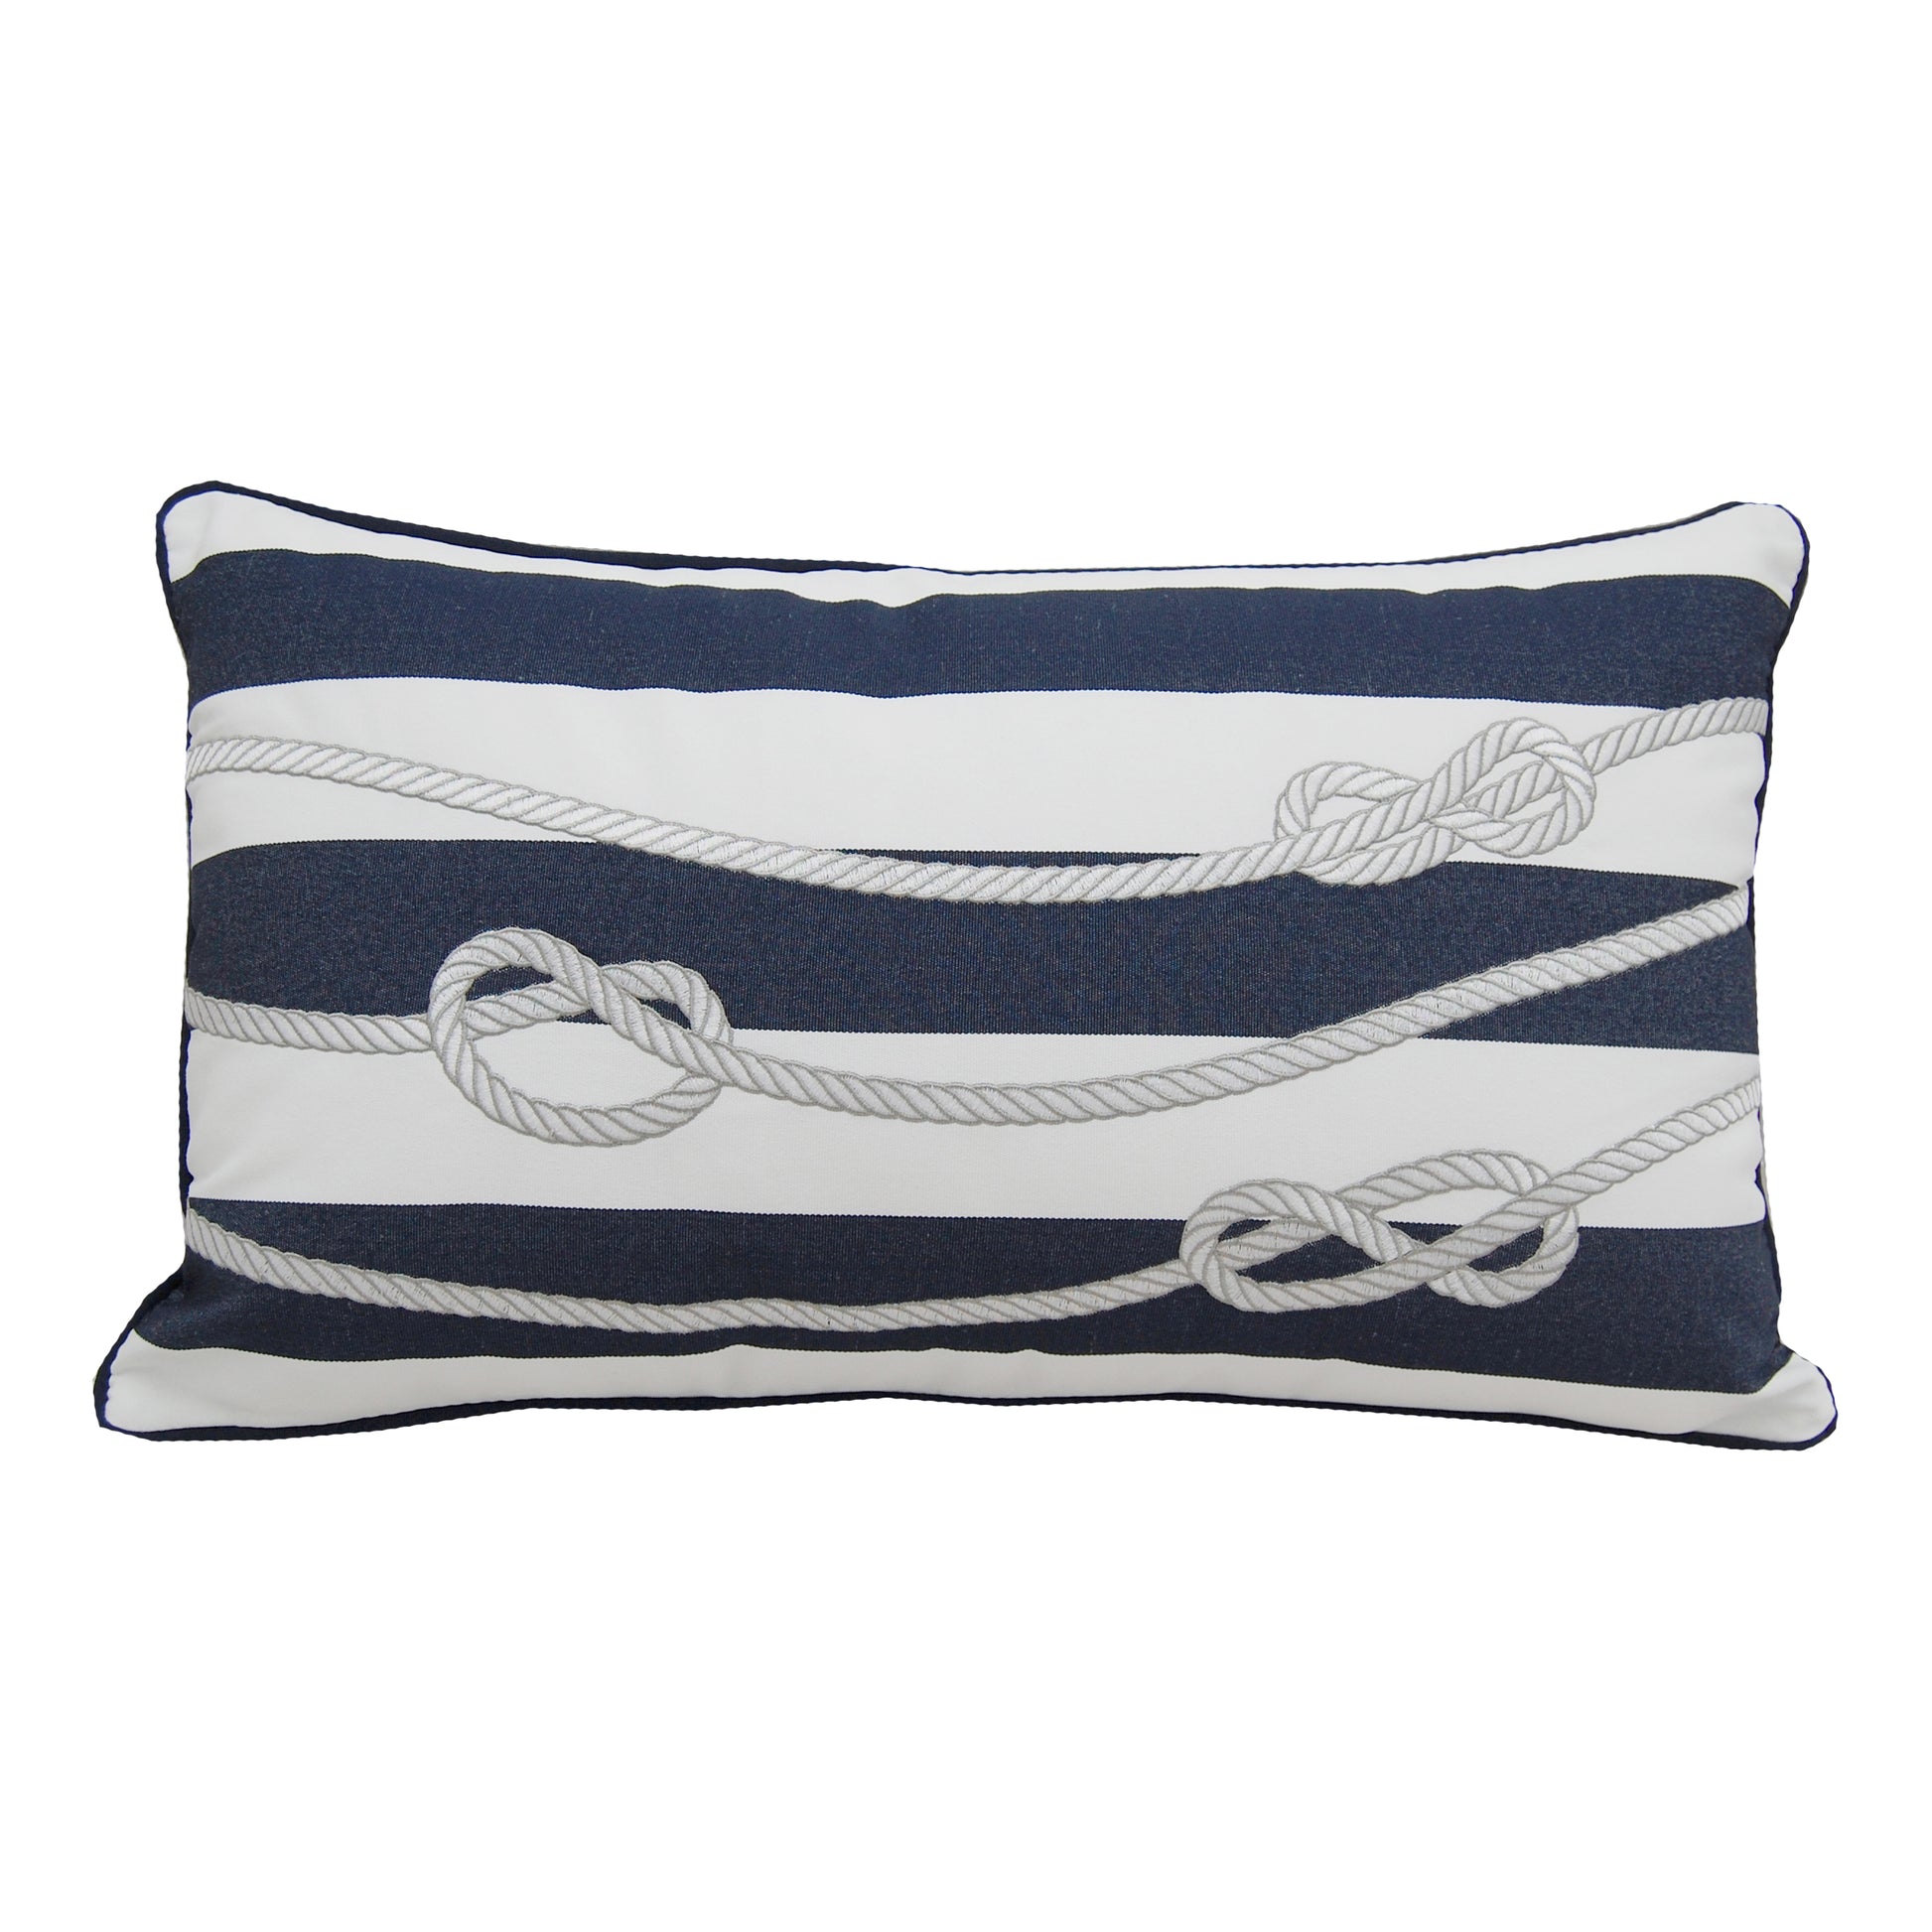 White rope embroidered on a white and blue striped background. Pillow is finished with a navy blue piped edging.